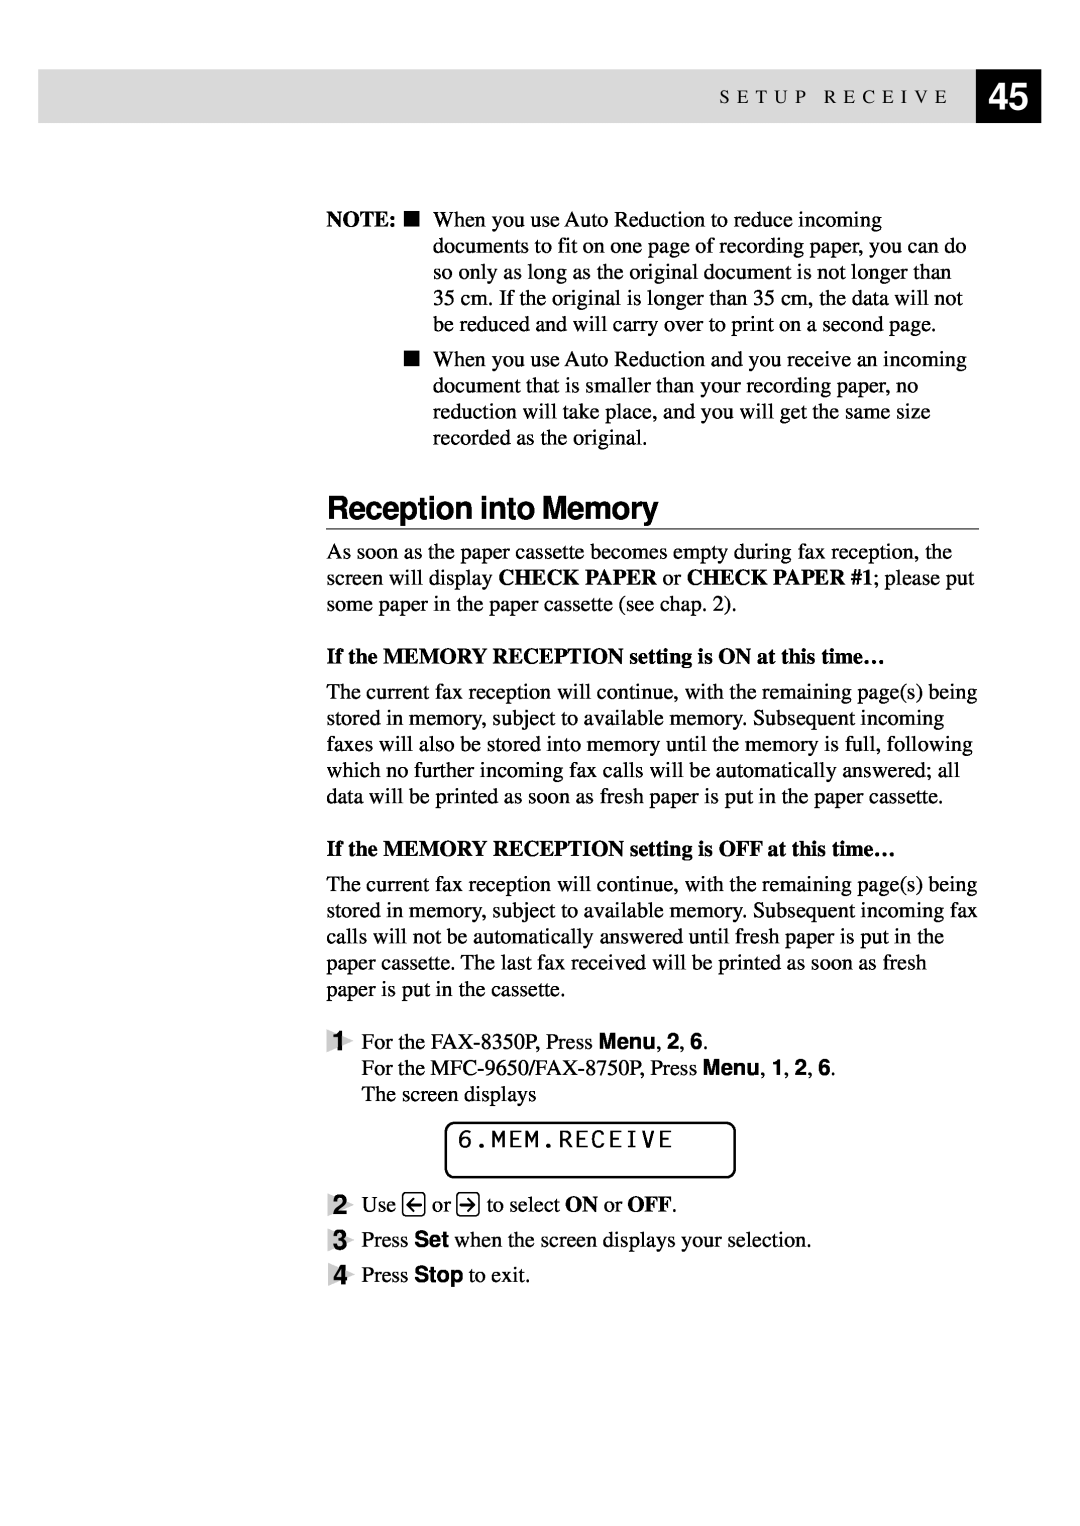 Brother MFC-9650, FAX-8350P Reception into Memory, 6.MEM.RECEIVE, If the MEMORY RECEPTION setting is ON at this time… 